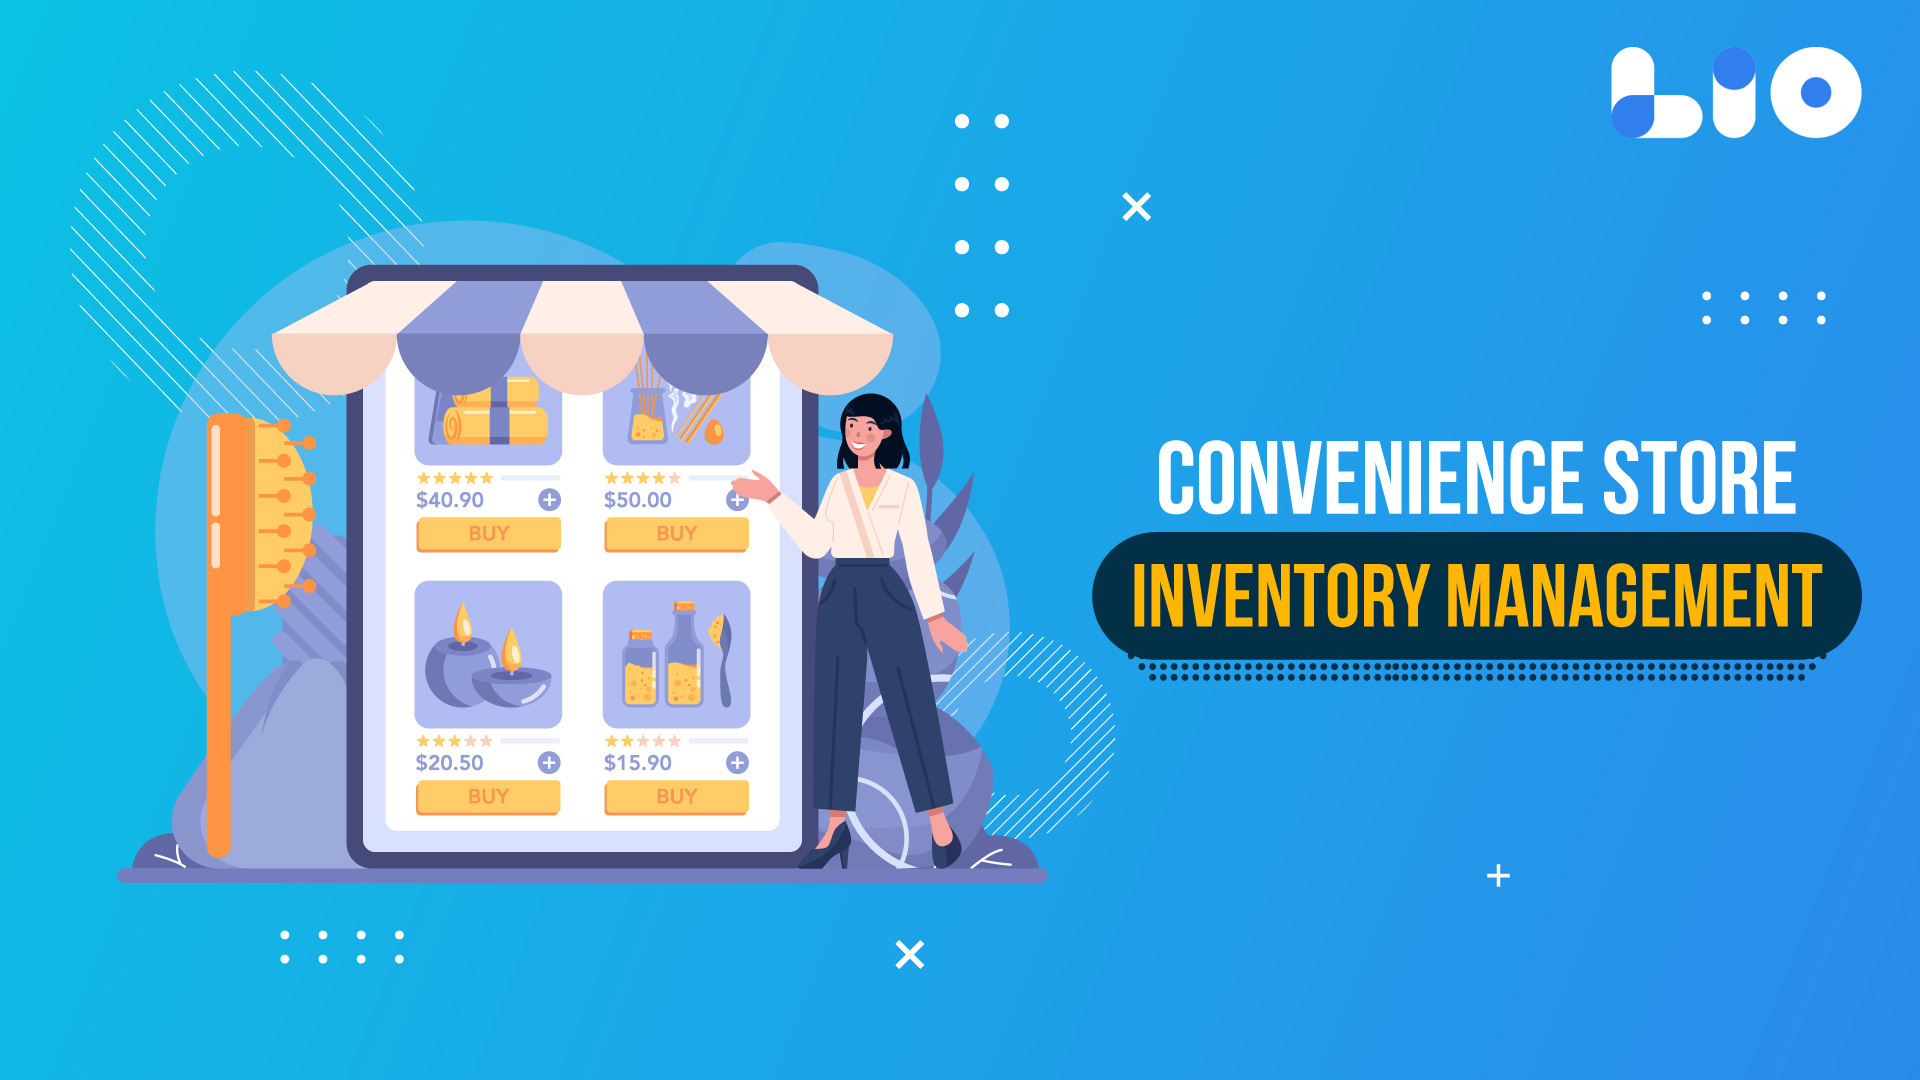 Simplifying Convenience Store Inventory Management with Technology